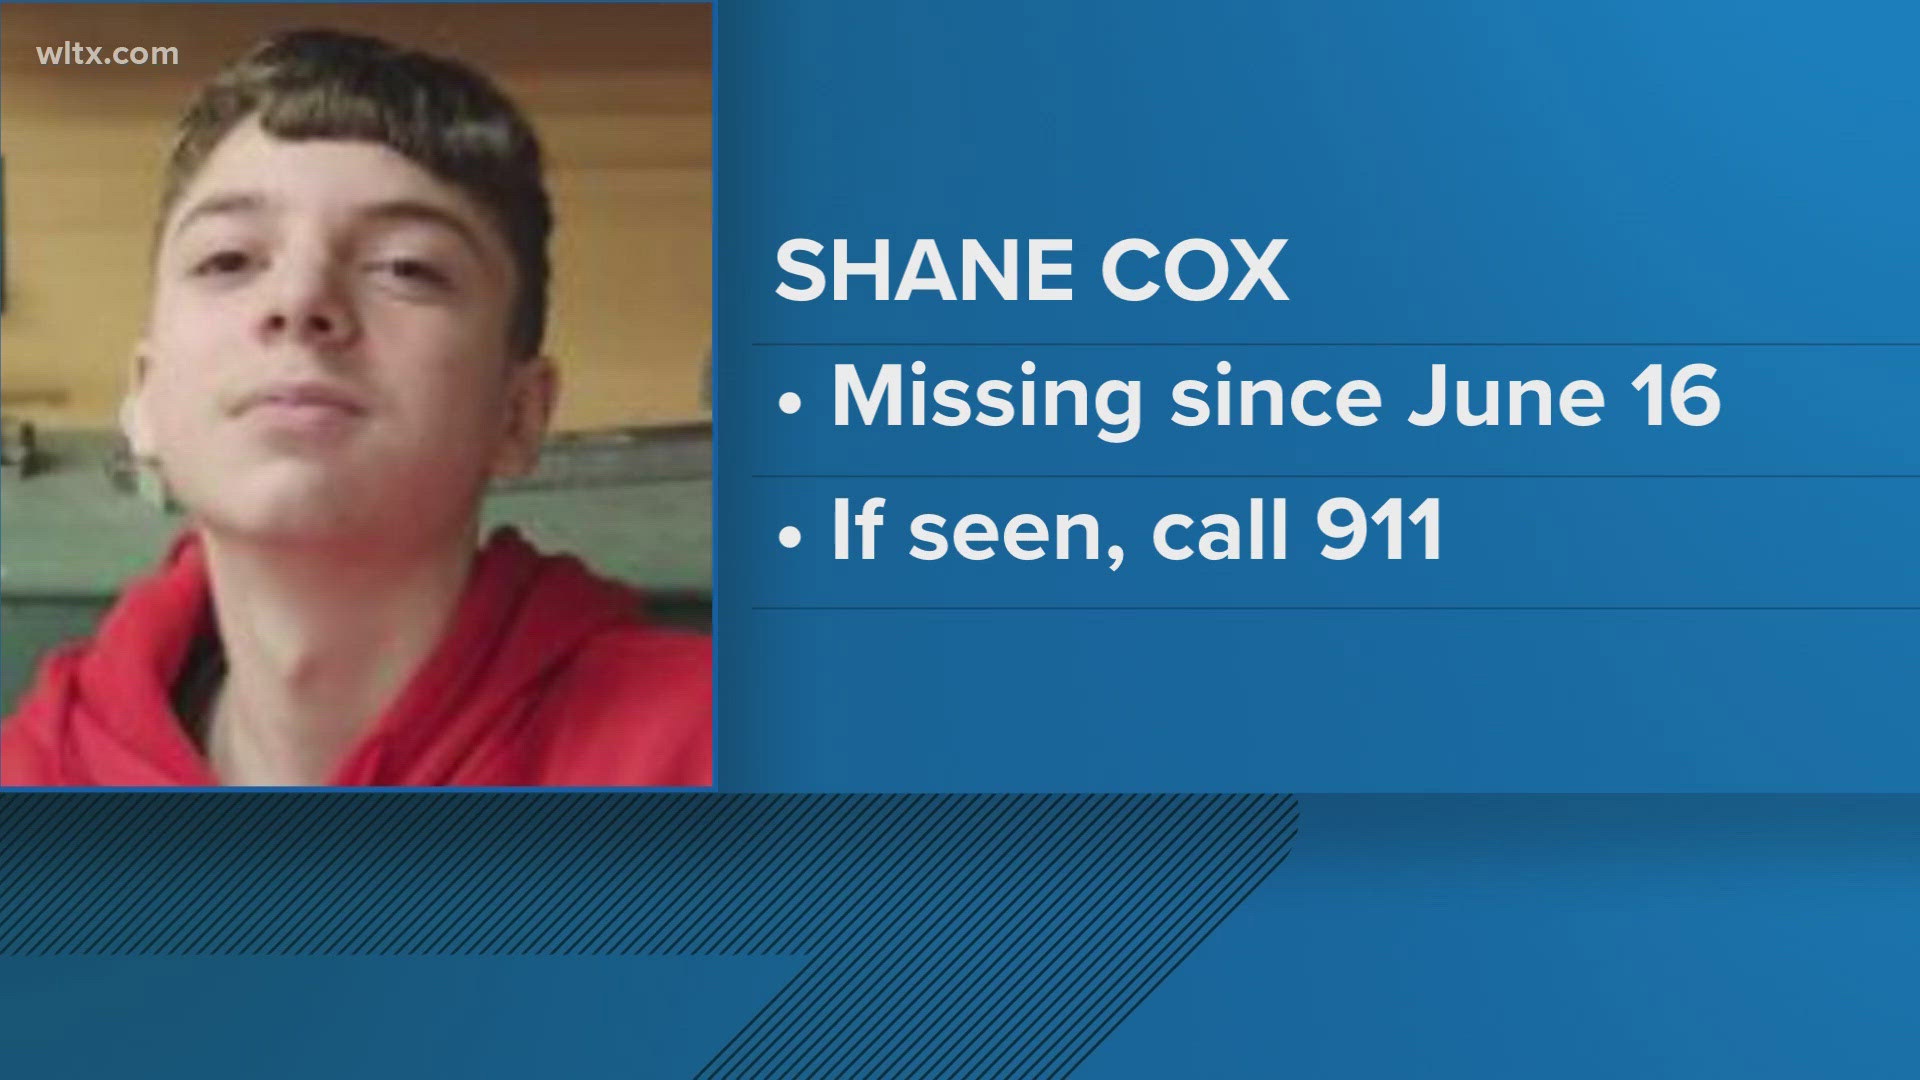 Shane Cox was last seen on June 16 when he walked away from his home on Truluck road in Sumter.